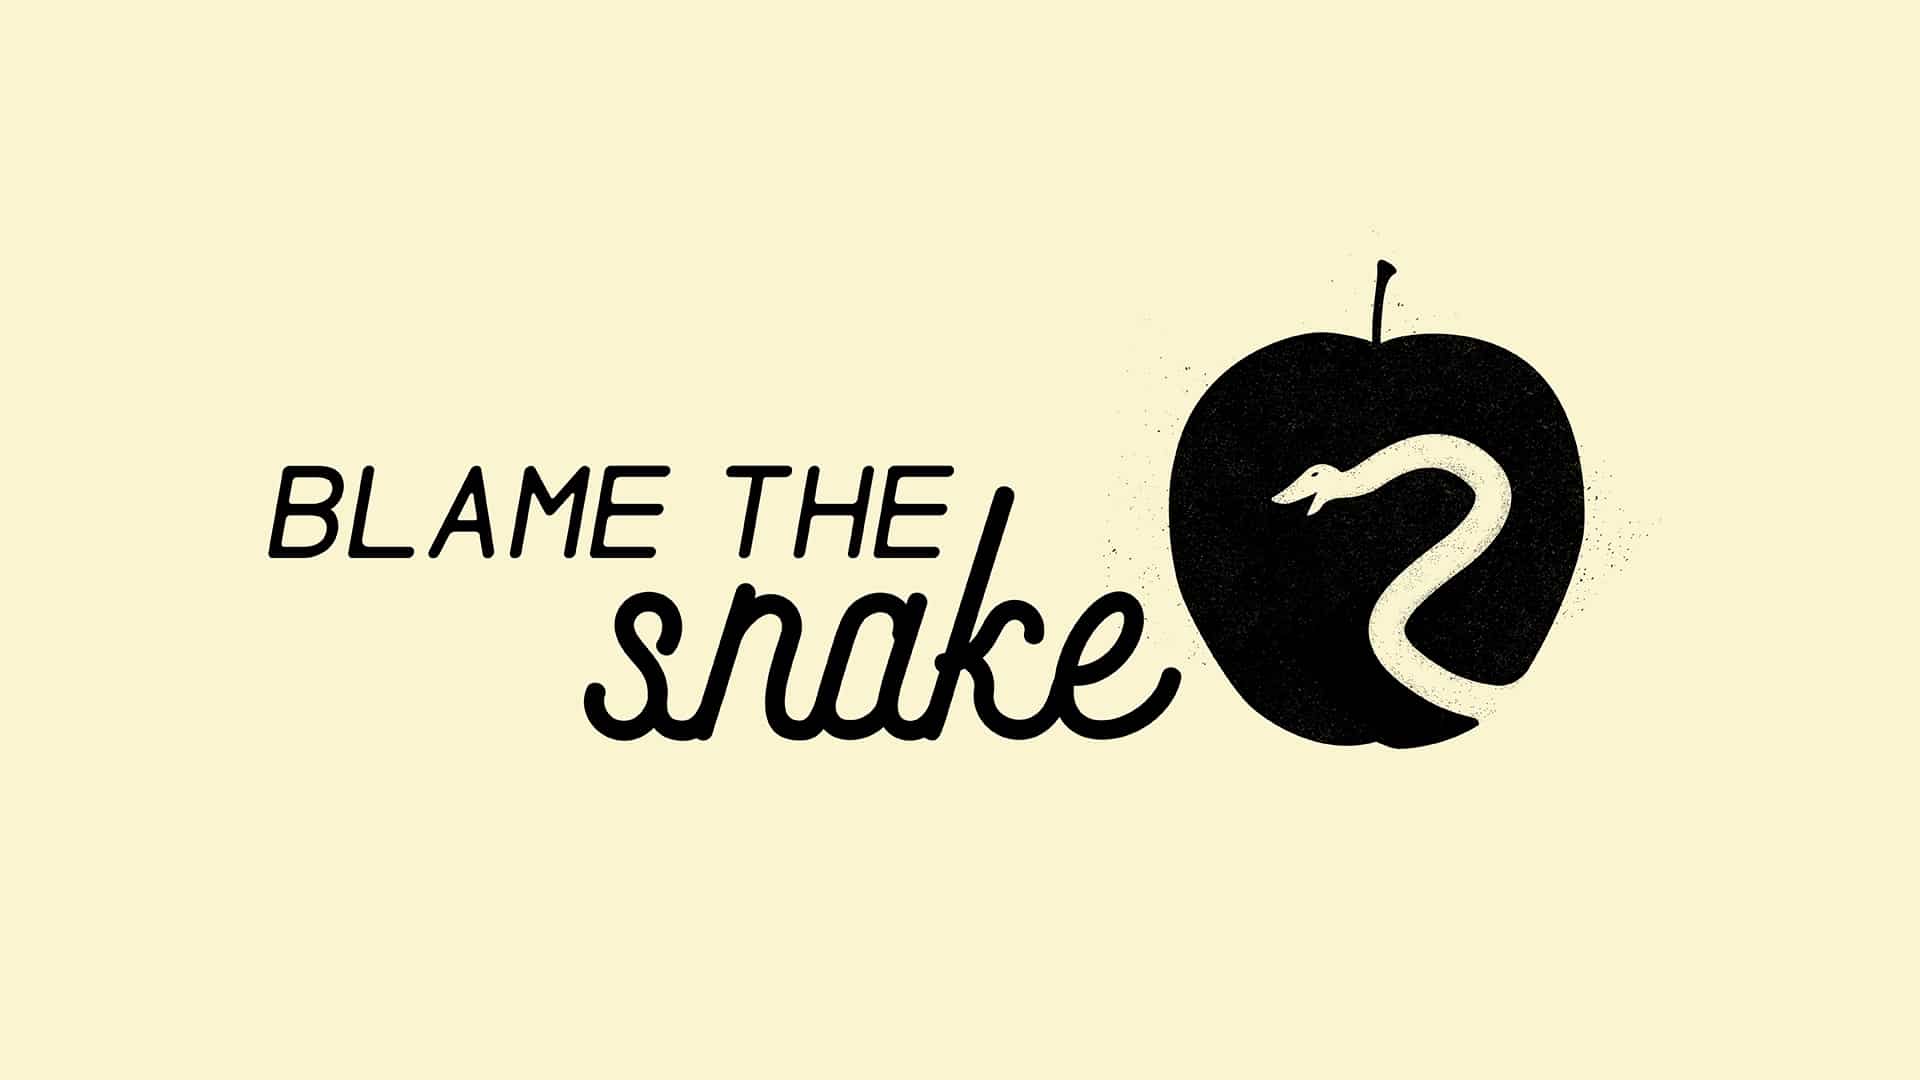 Featured image for “Blame The Snake”